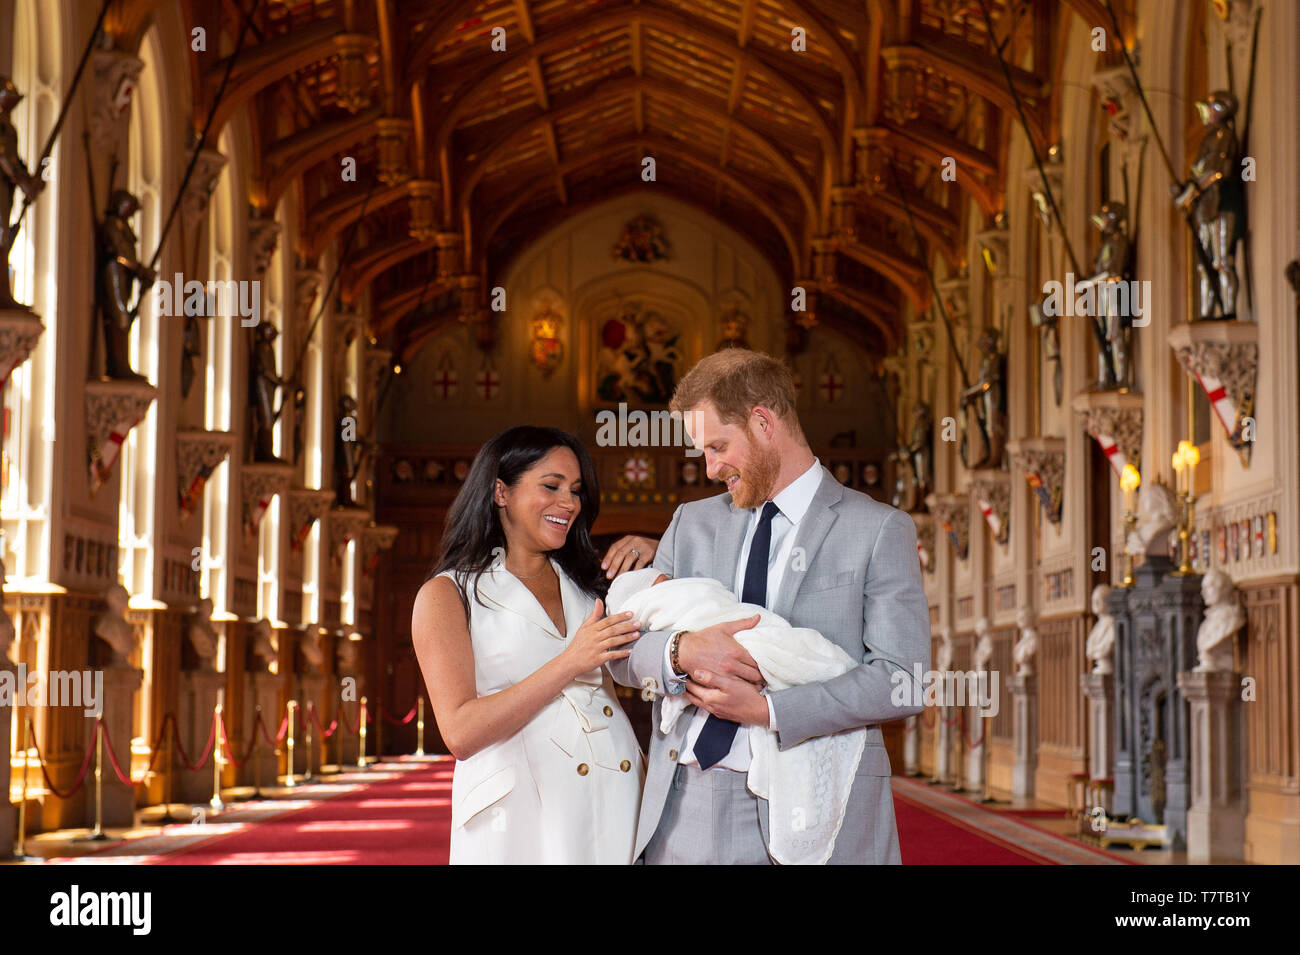 Beijing, Britain. 8th May, 2019. Britain's Prince Harry, Duke of Sussex (R), and his wife Meghan Markle, Duchess of Sussex, pose for a photo with their son in St George's Hall at Windsor Castle in Windsor, Britain, on May 8, 2019. The baby boy, who is Queen Elizabeth's eighth great-grandchild, is seventh in line to the throne, behind the Prince of Wales, the Duke of Cambridge and his children - Prince George, Princess Charlotte and Prince Louis - and Prince Harry. Credit: Dominic Lipinski/PA Wire/Xinhua/Alamy Live News Stock Photo